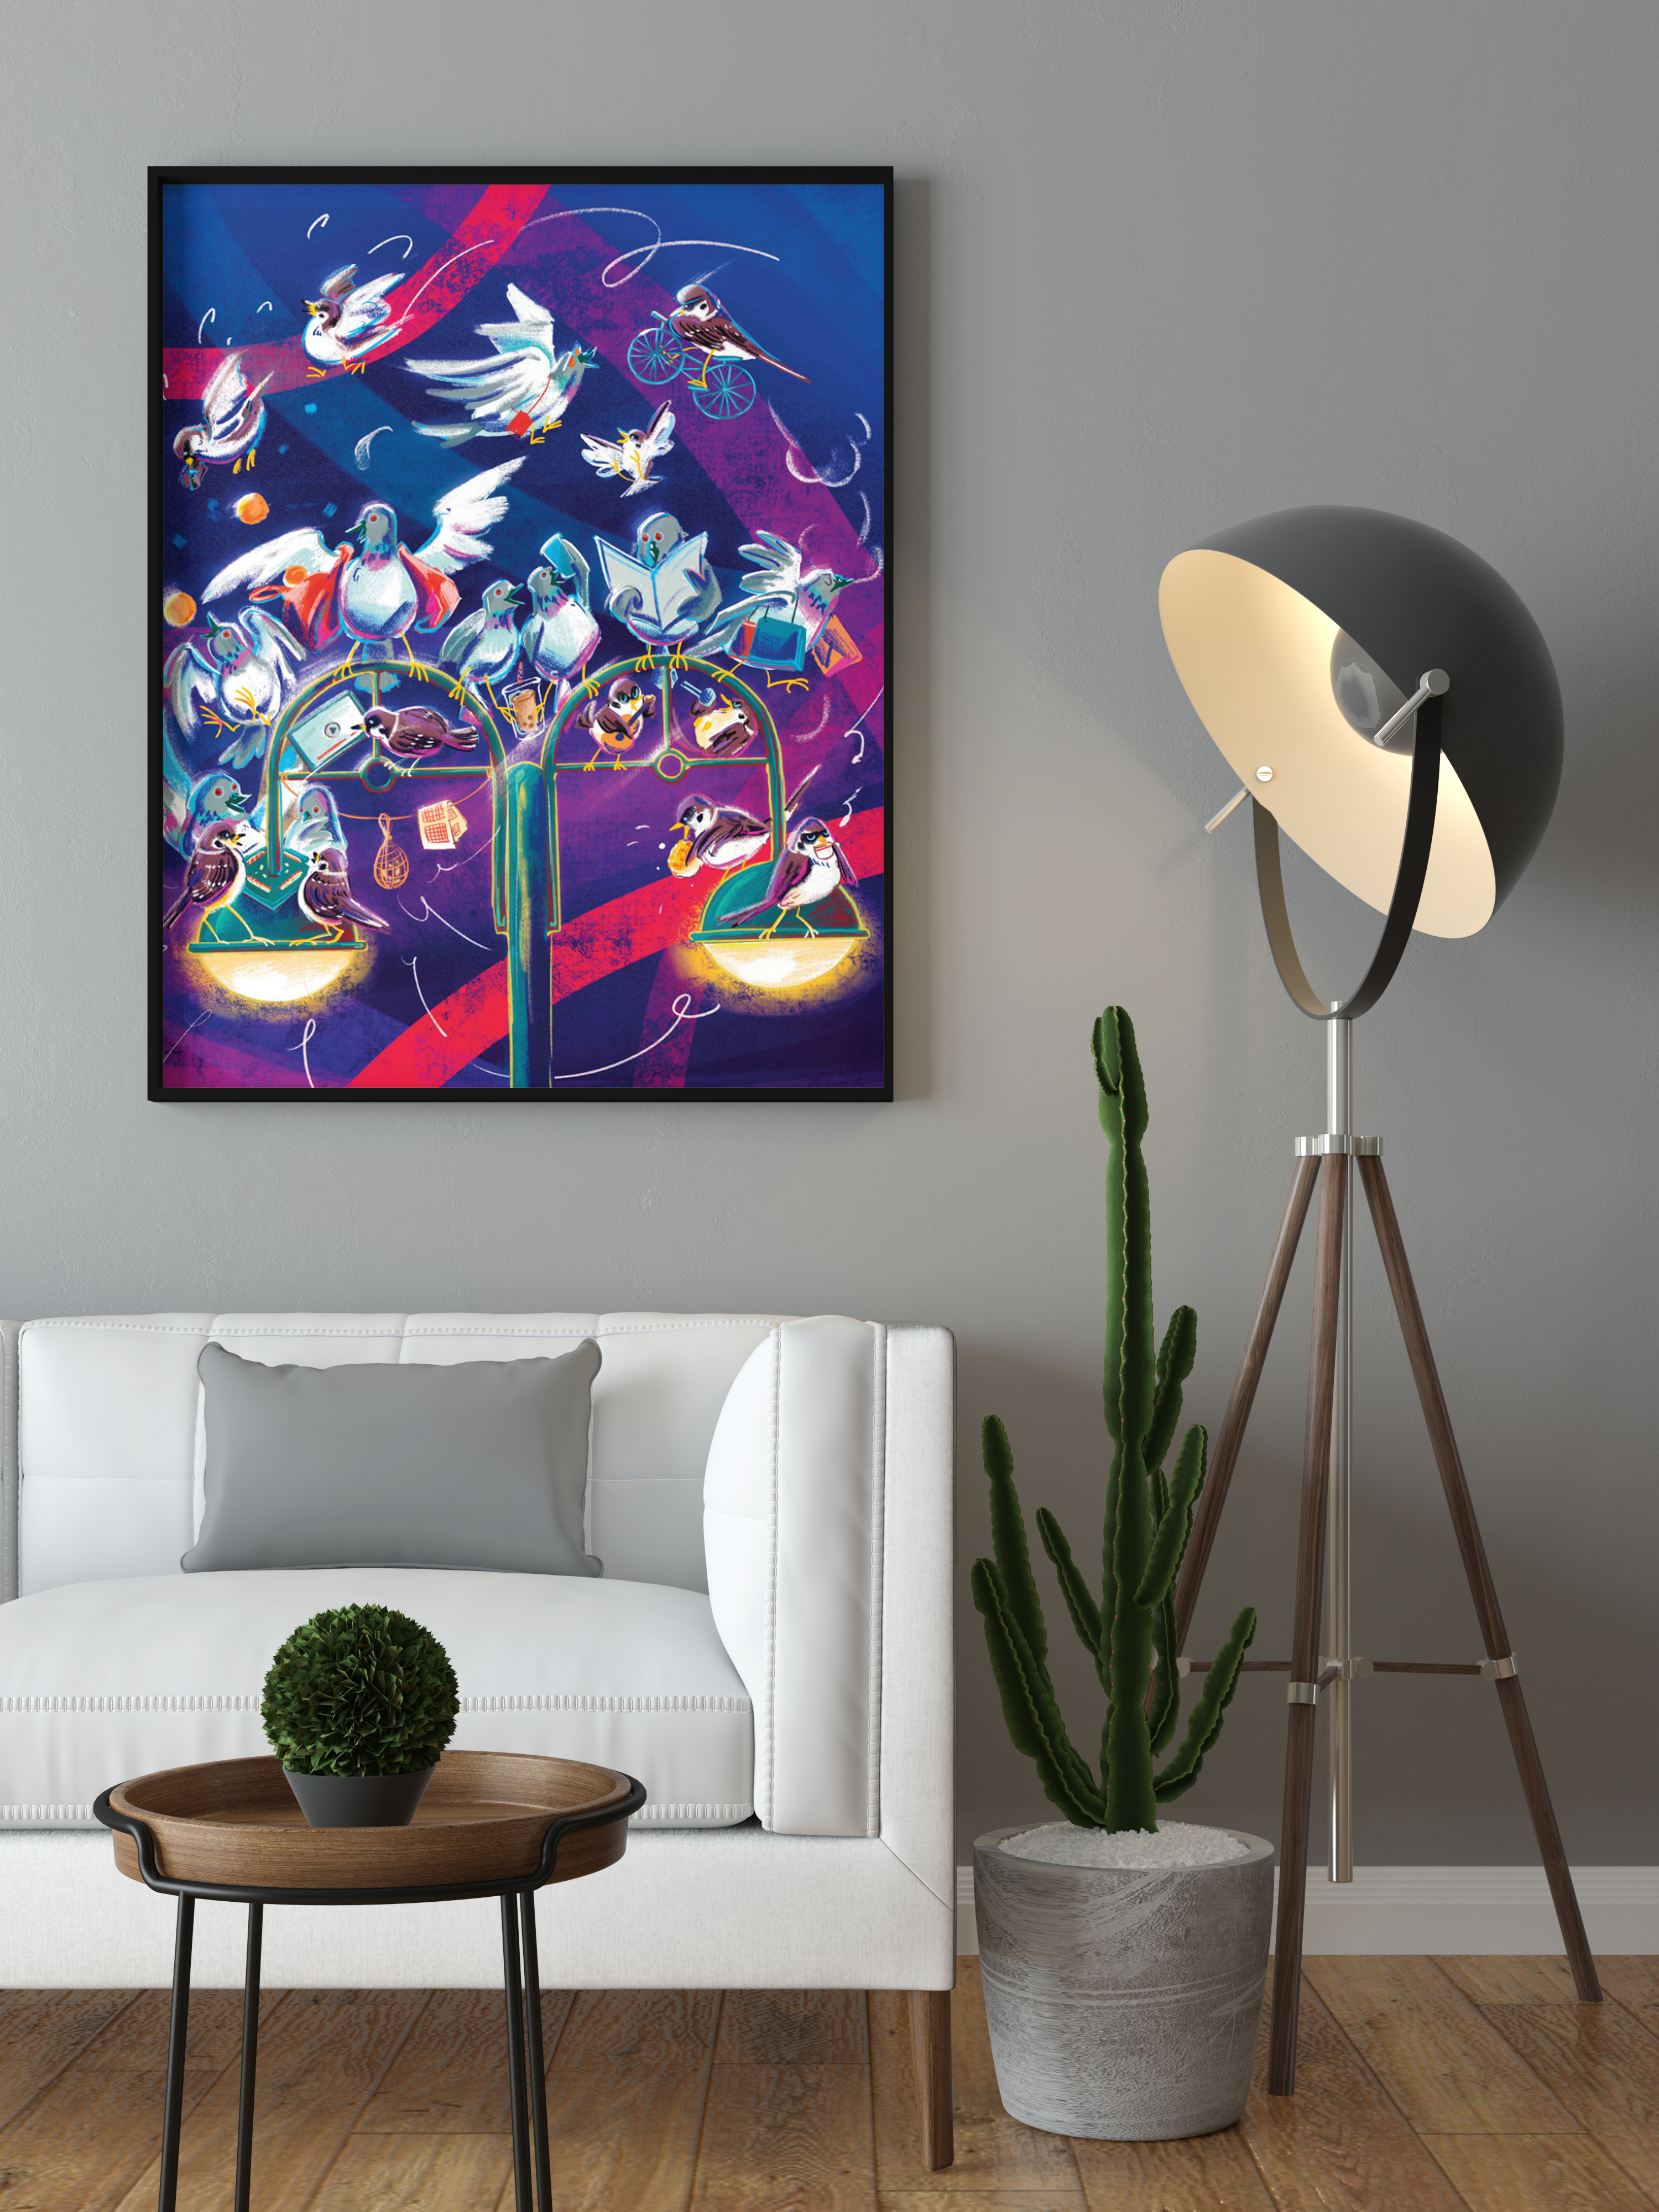 Blue themed canvas with multiple blue birds performing circus